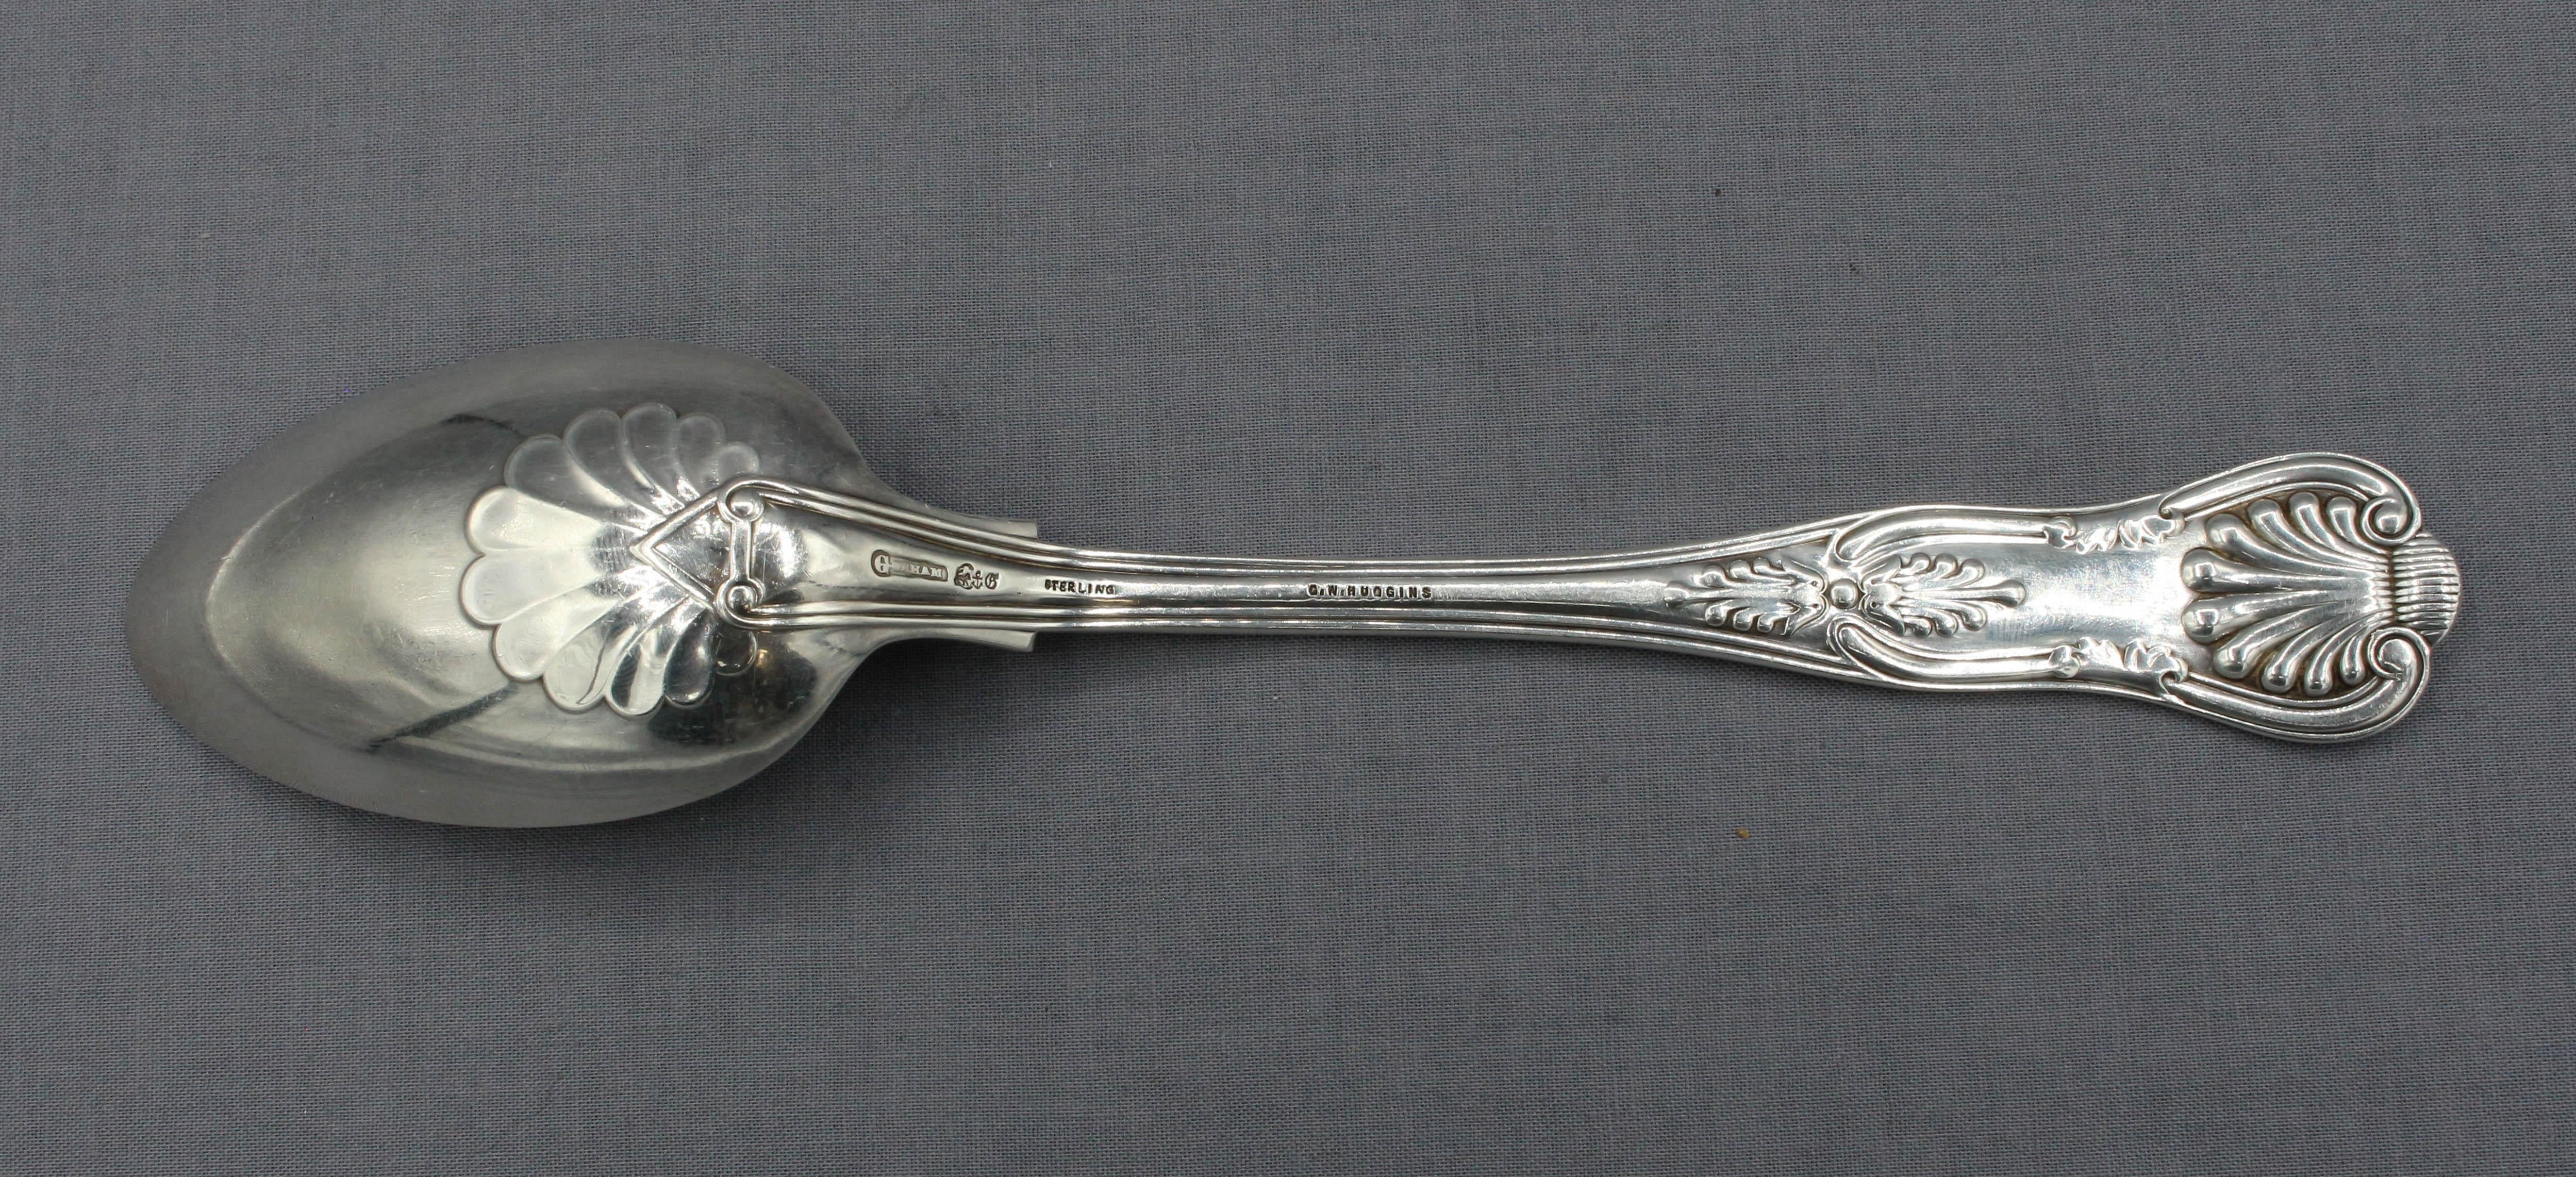 Circa 1900 Set of 4 Sterling Silver Serving Spoons in 